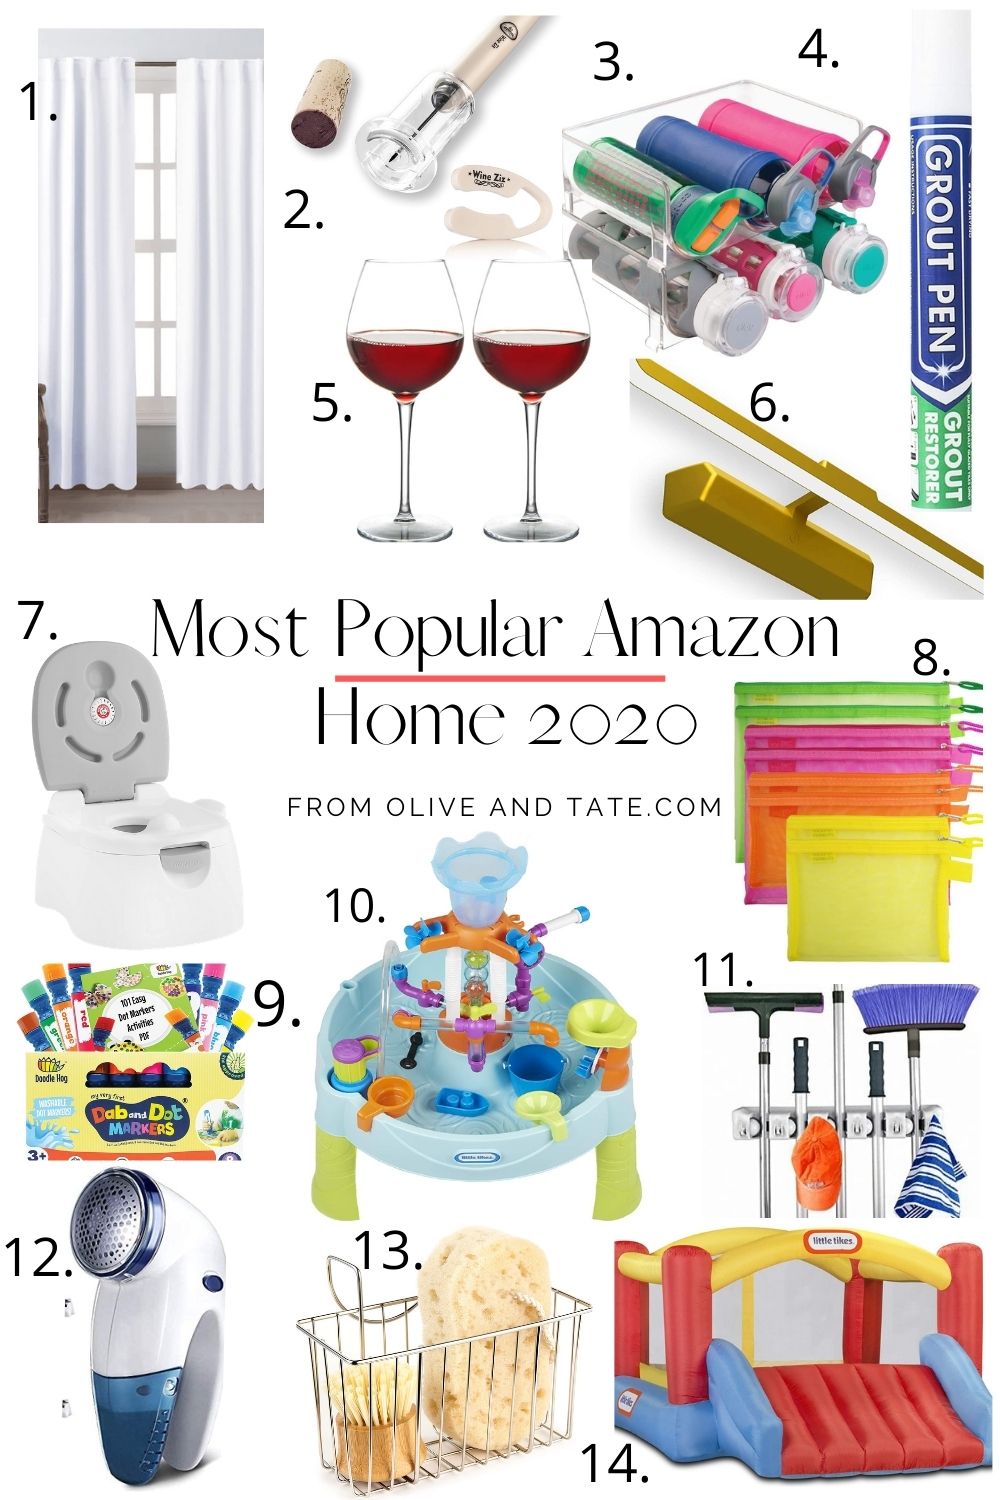 The Best Sellers of Amazon Home and Family 2020